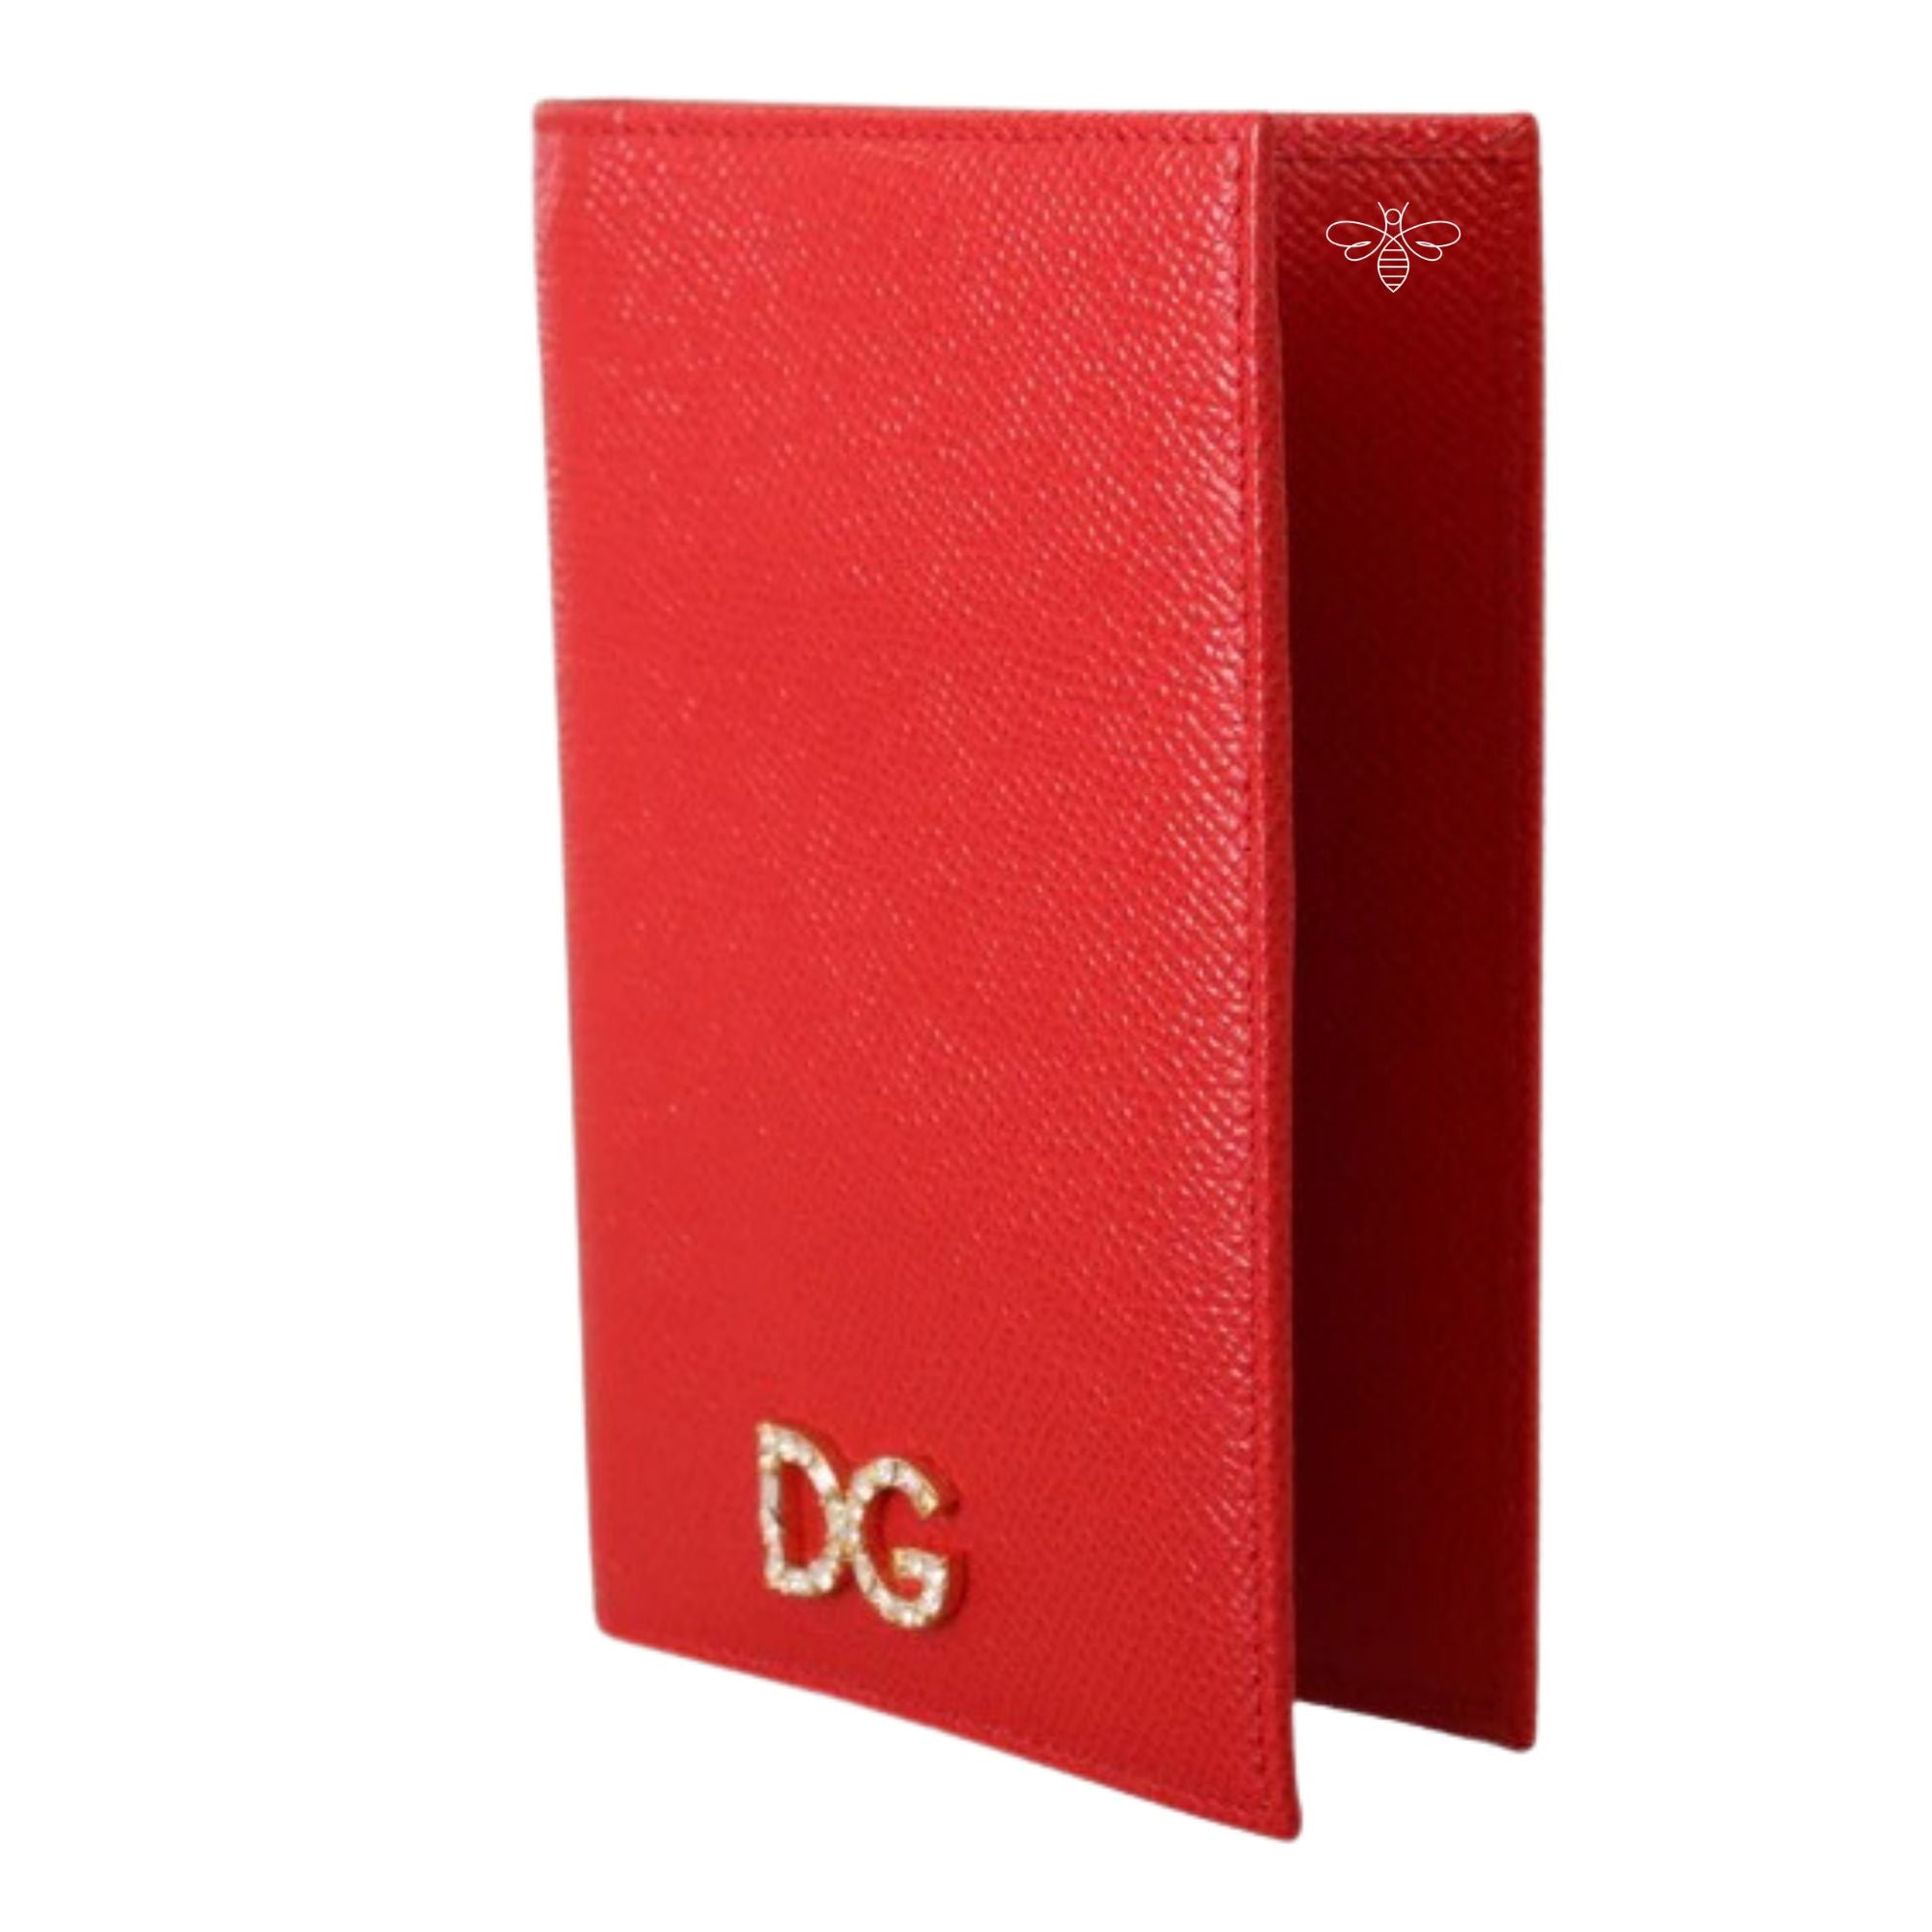 Dolce & Gabbana Red Dauphine Leather Bifold Wallet